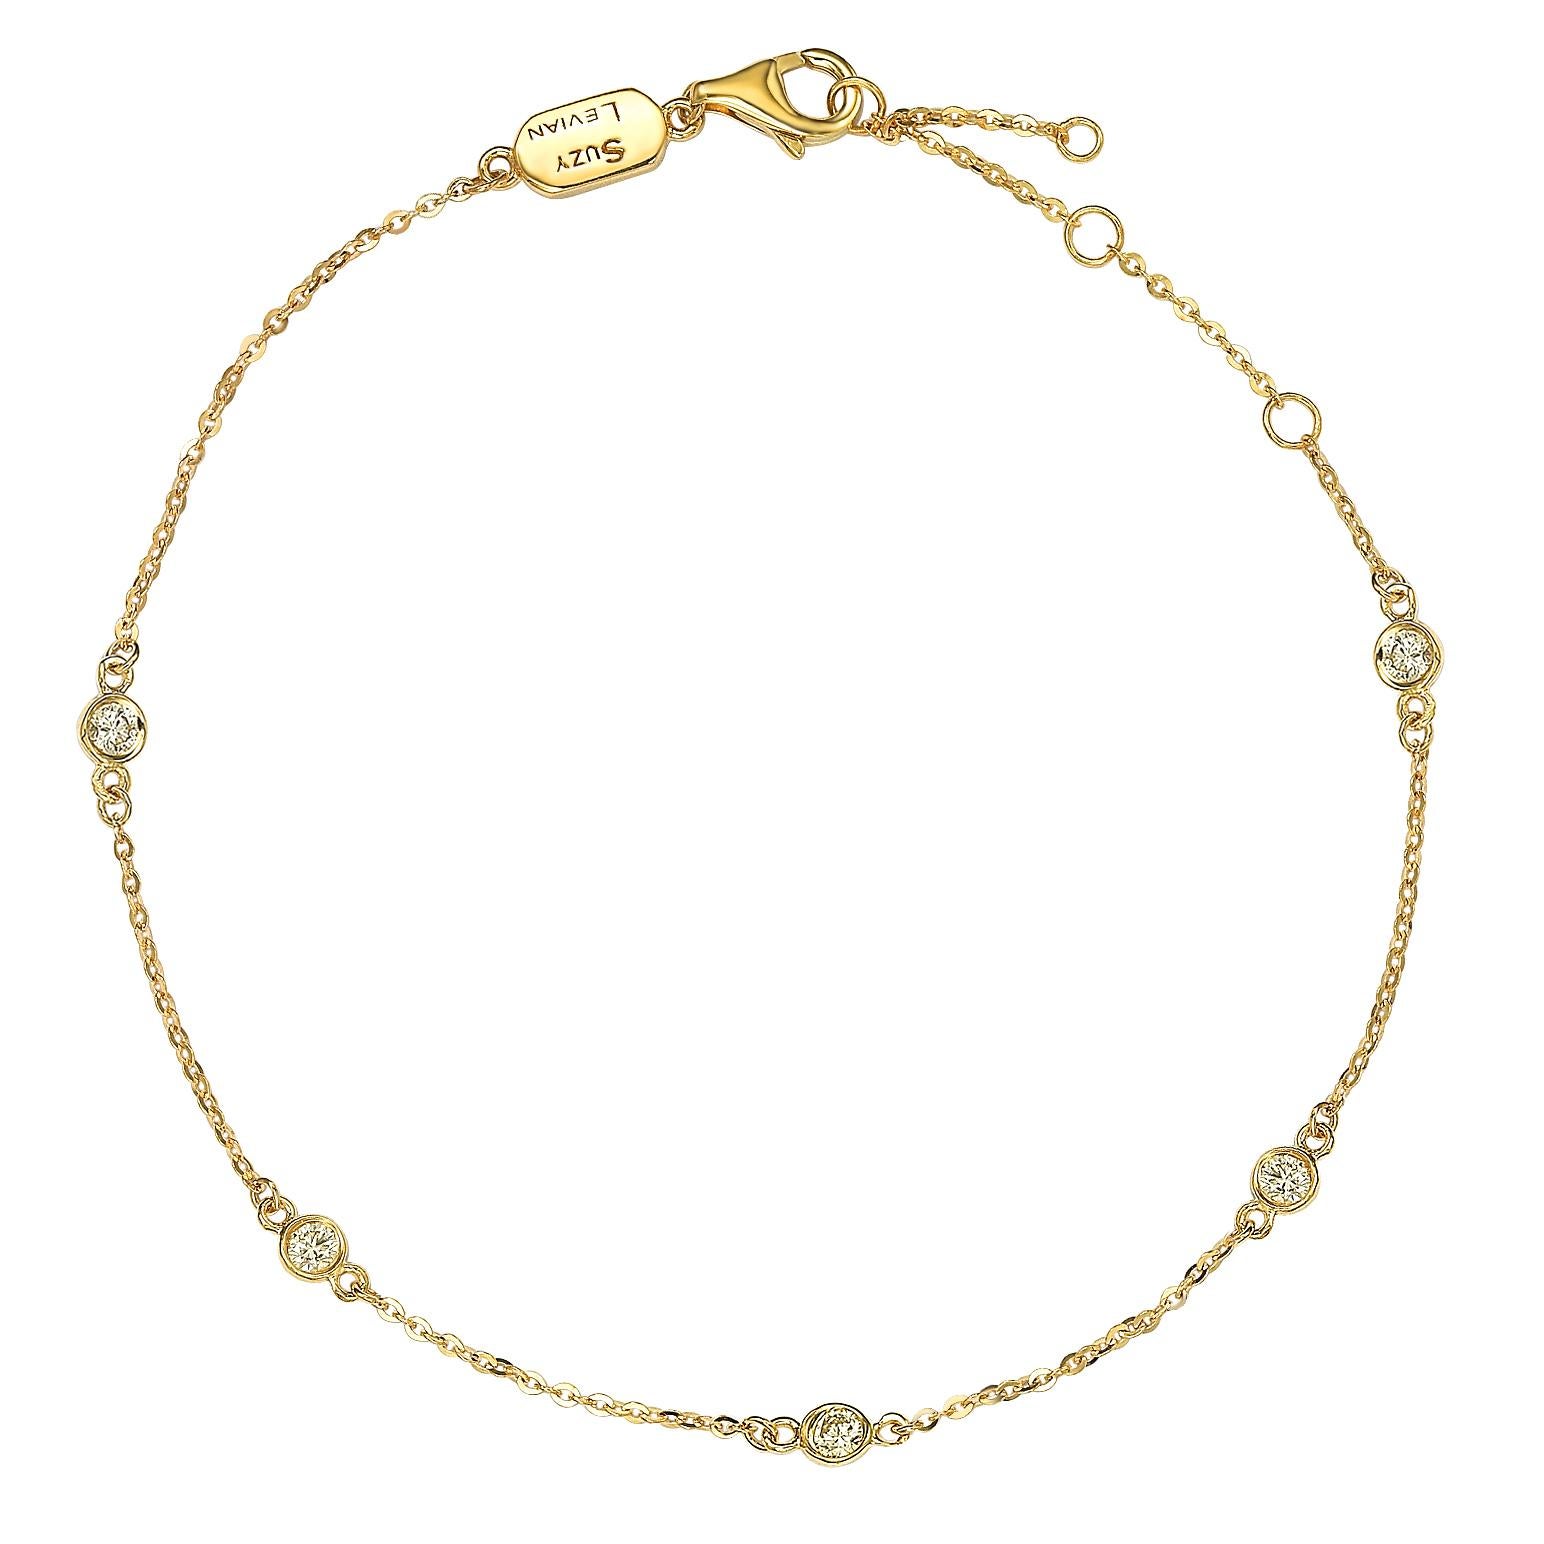 This elegant bracelet features a five round-cut diamonds on a thin 14 karat yellow gold chain. A high polish finish completes the look. This bracelet has the adjustable length options of 6.5, 7, and 7.5 to better fit every wrist. 

White